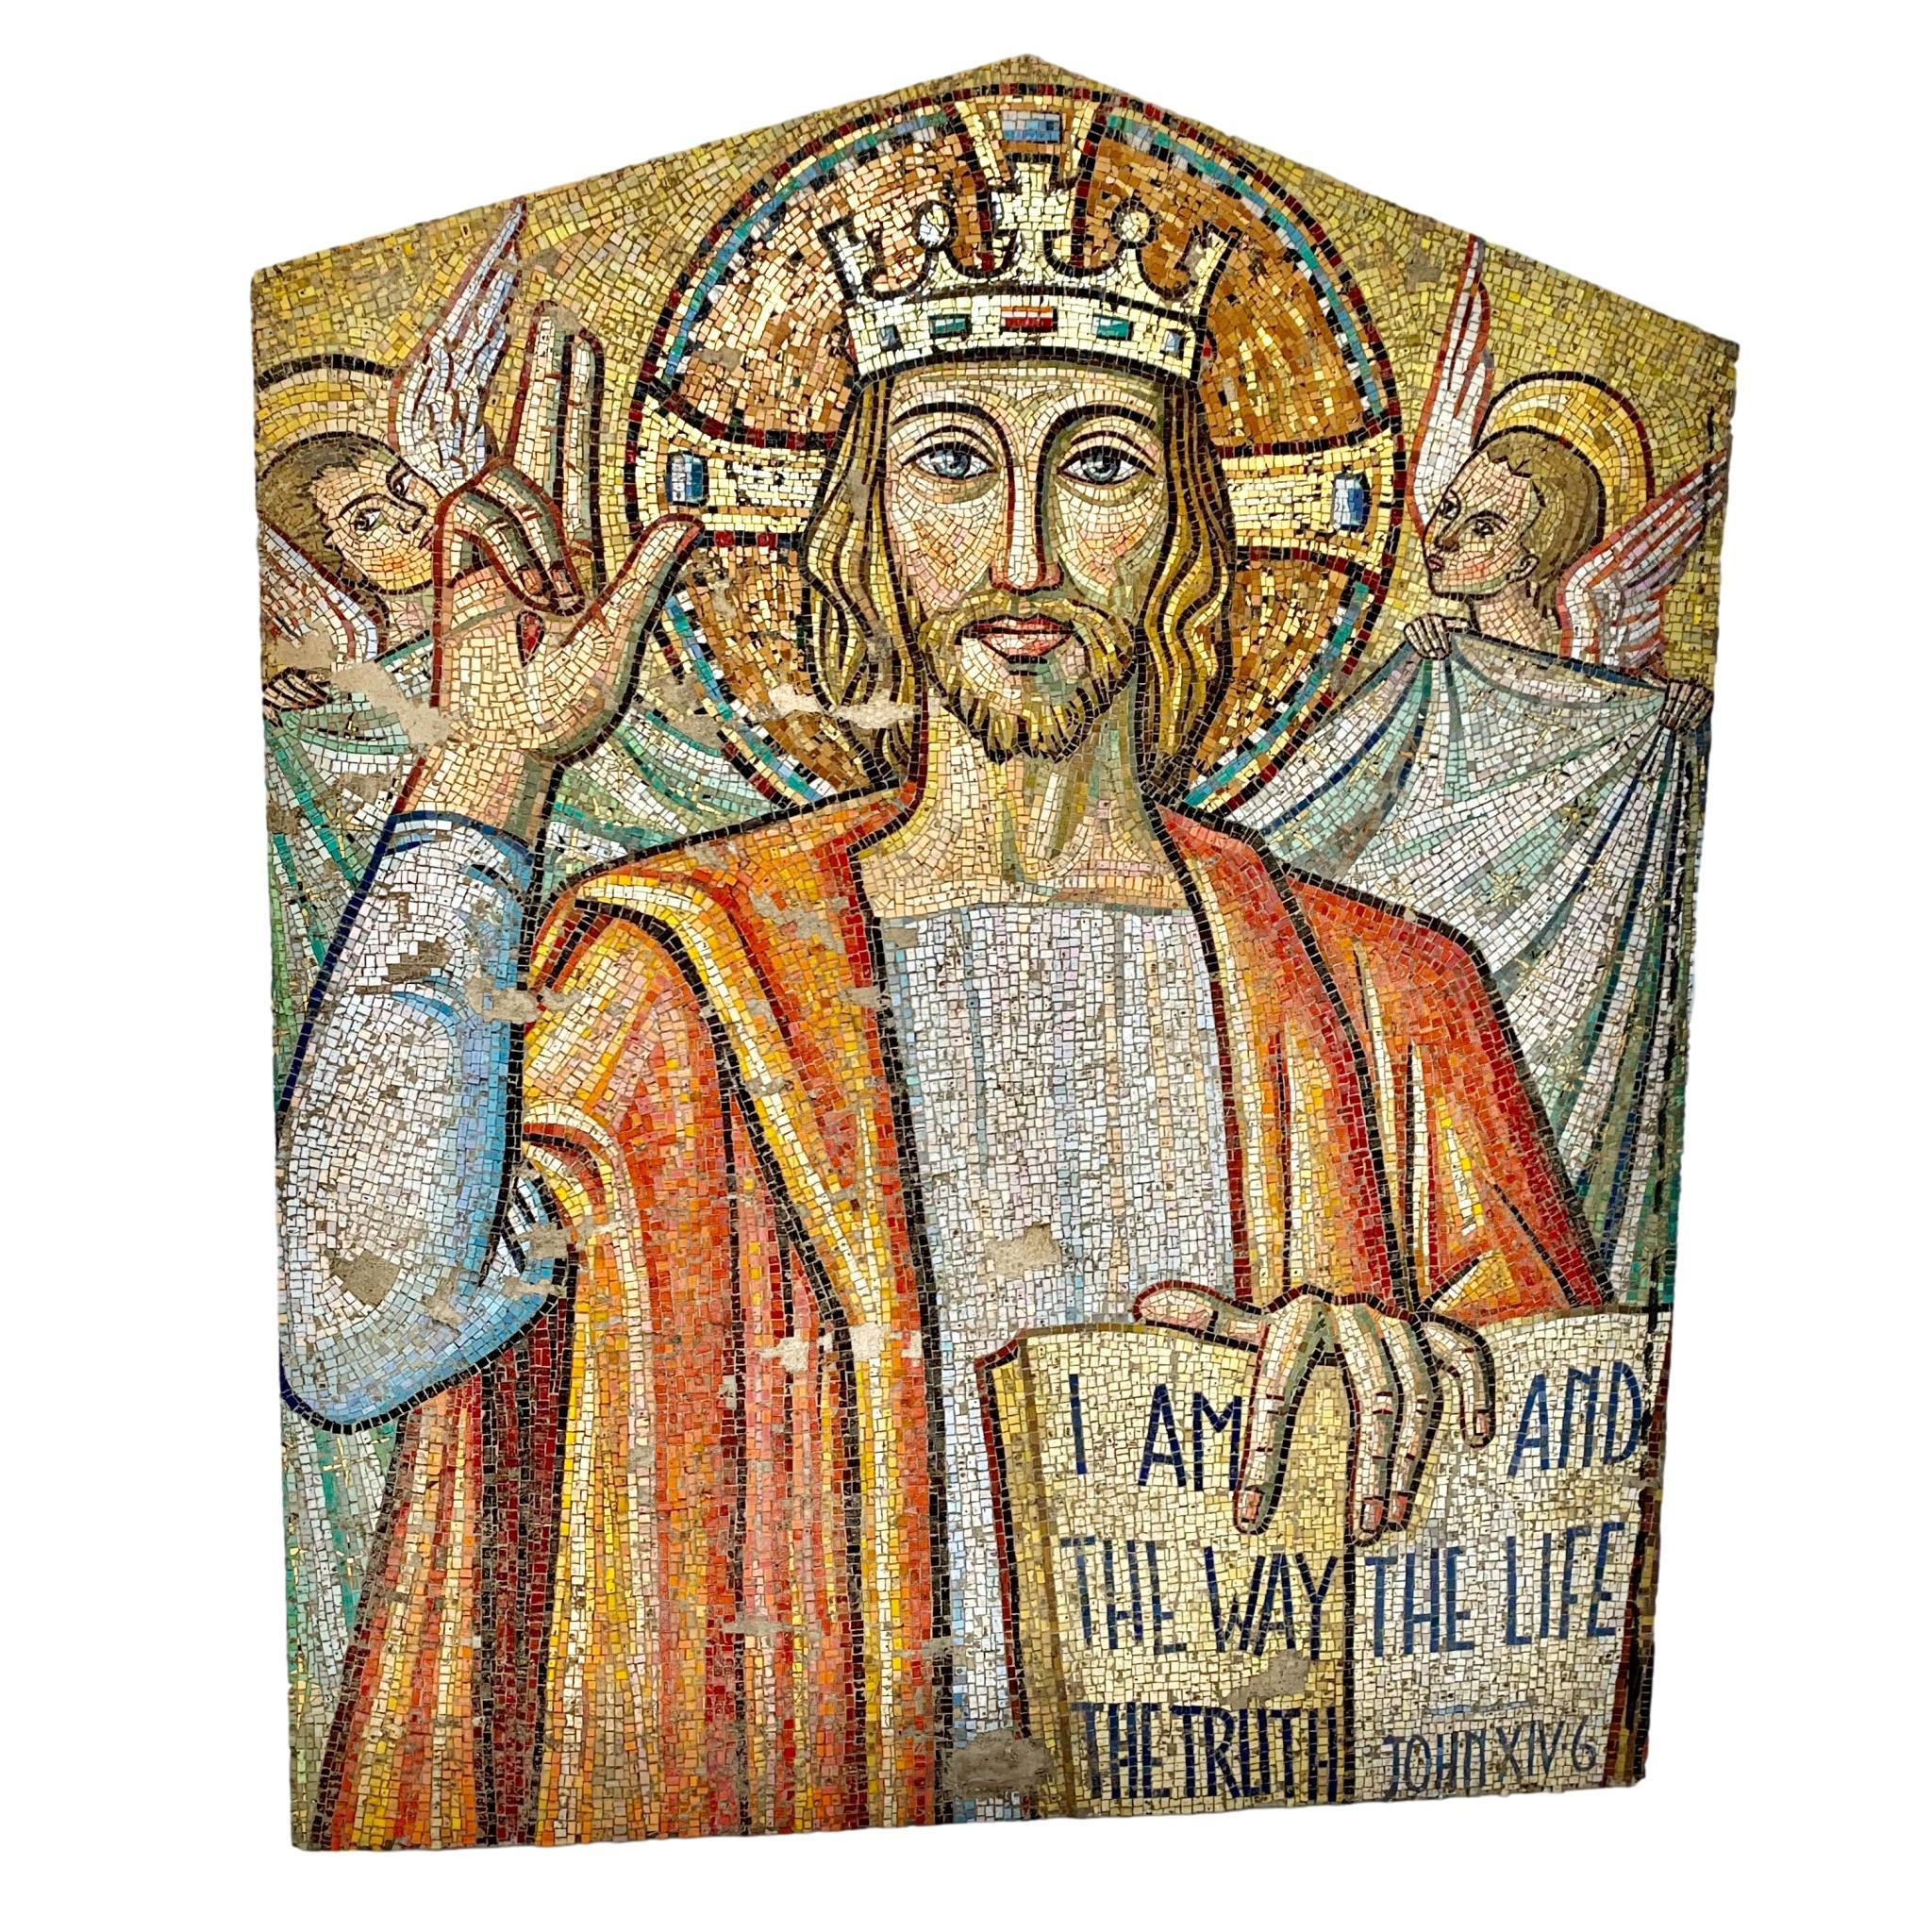 Massive handcut mosaic tile religious mural from the mid-1800s. Salvaged from a church out of the mid-west United States. Thousands of individually placed mosaic tiles. Gold leaf Smalti placed along the entire top of the mural. Open bible with the